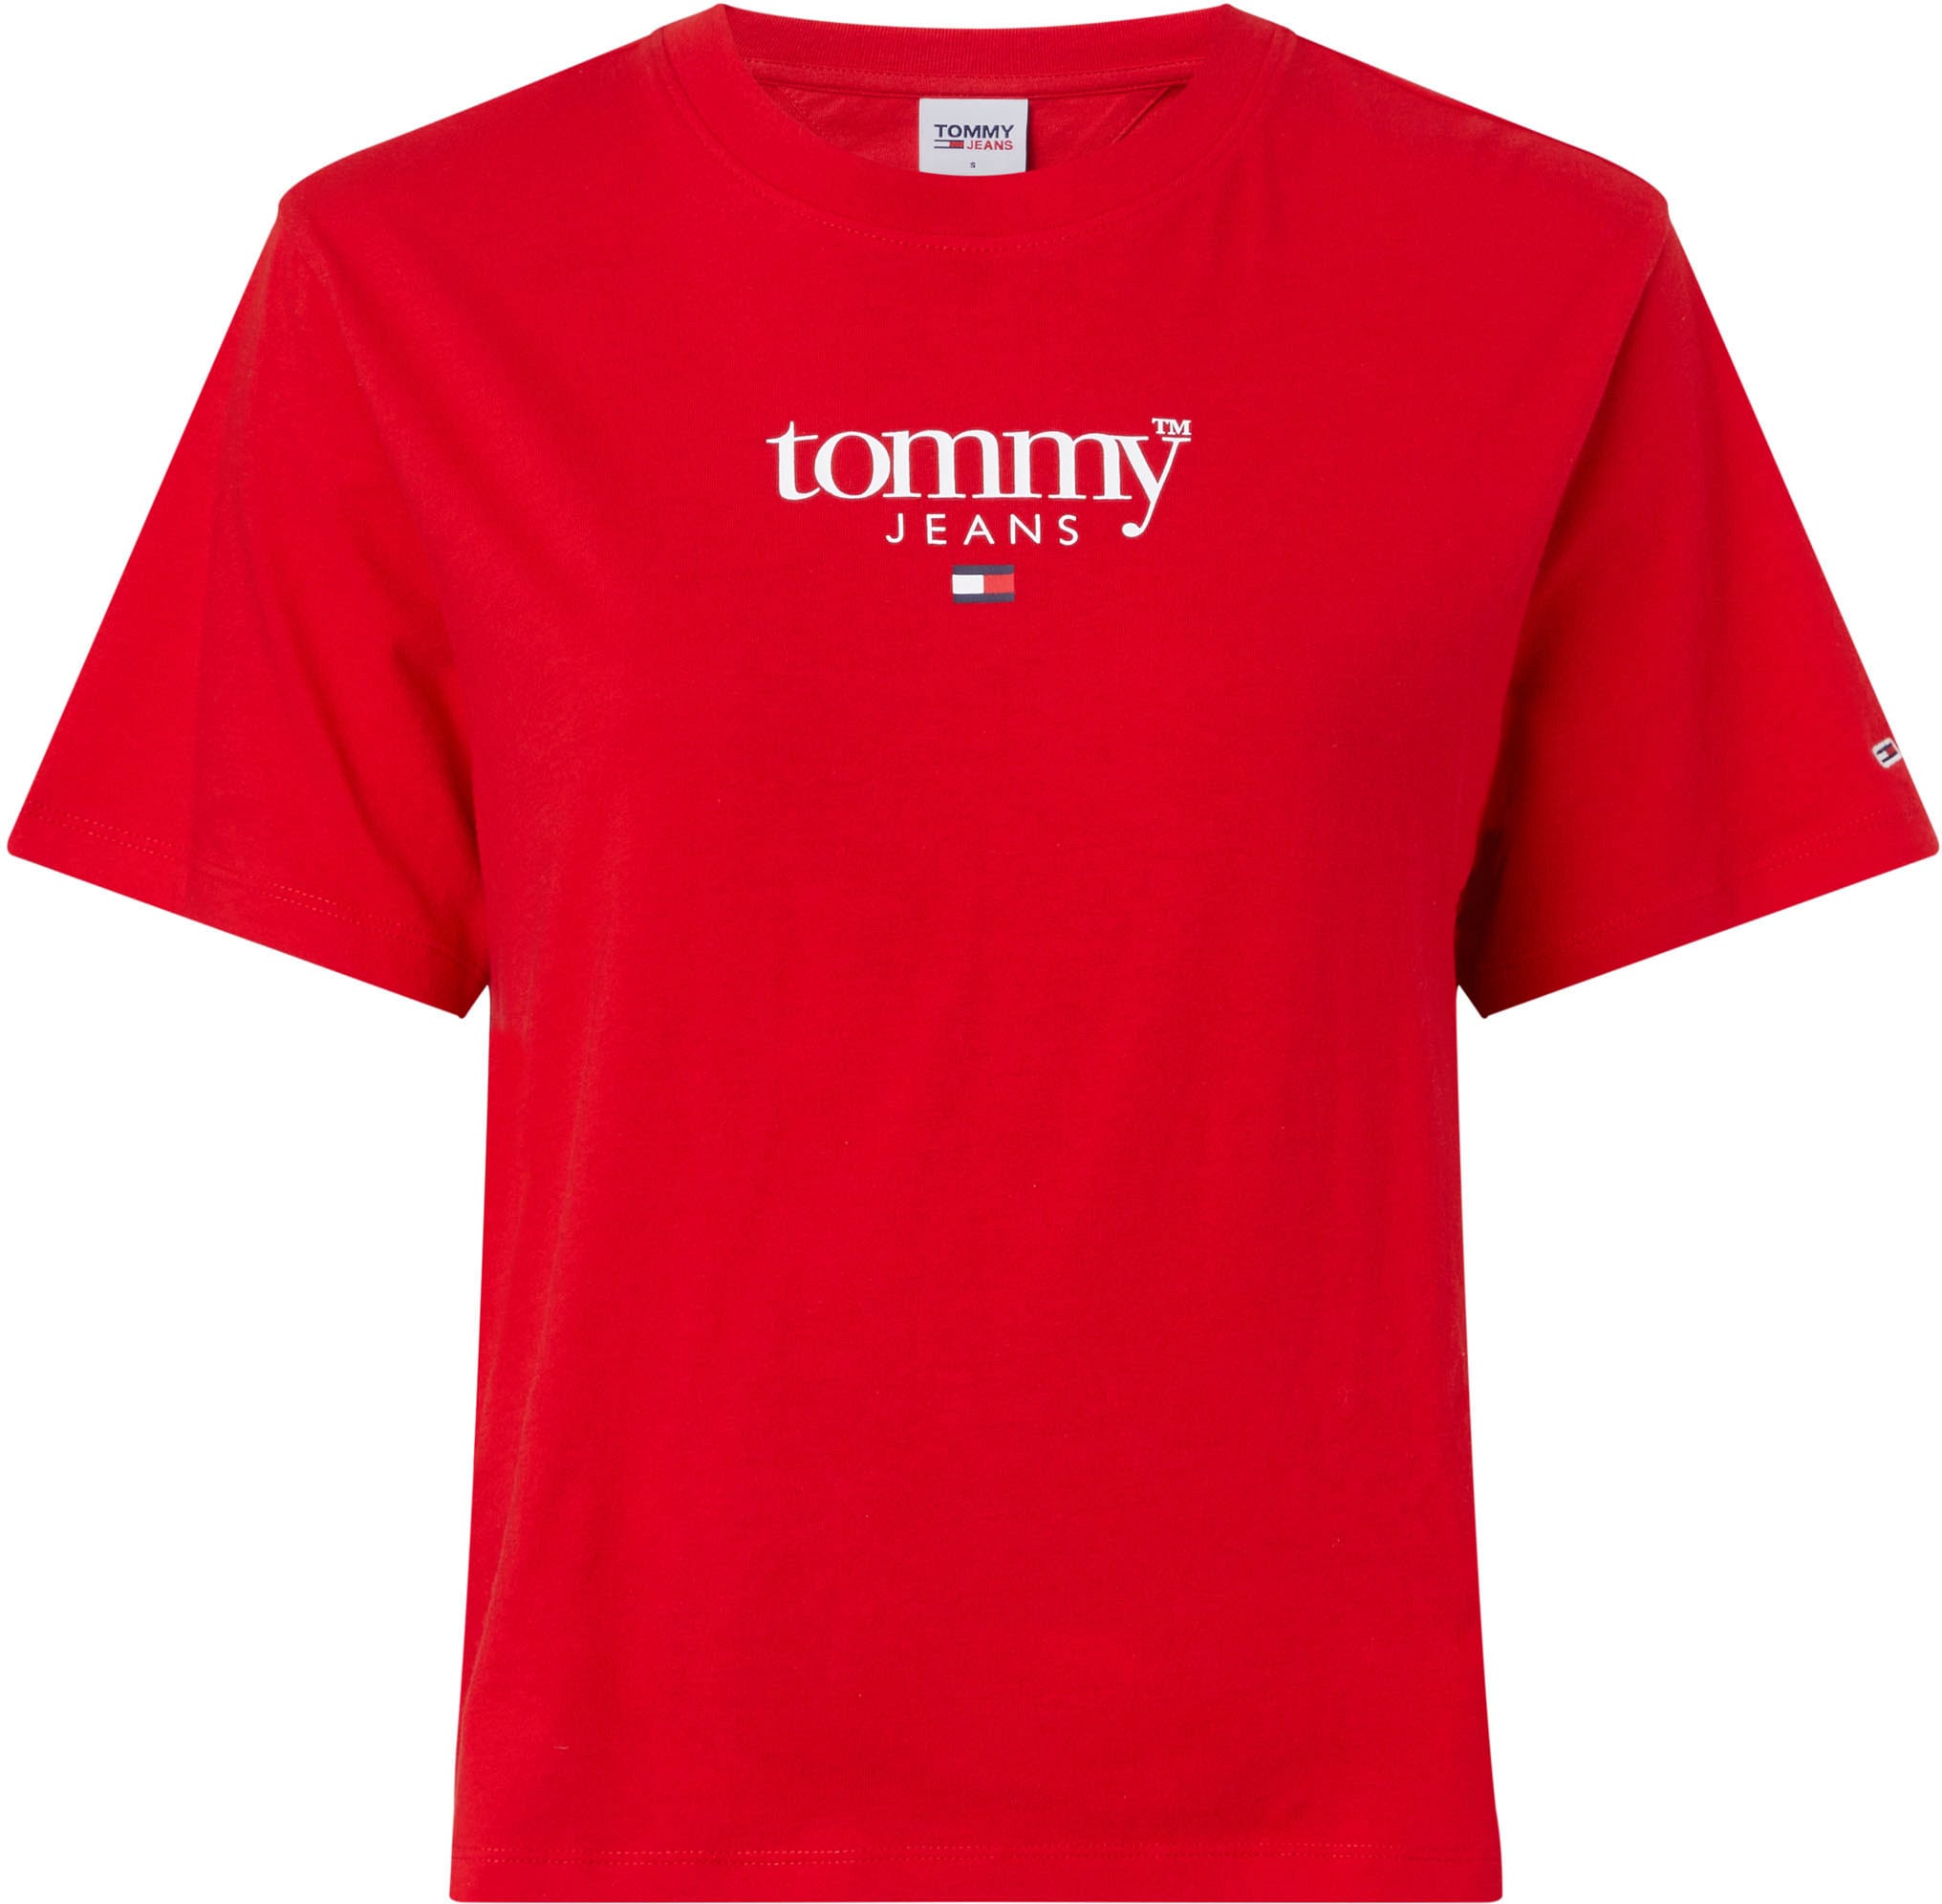 Tommy Jeans Kurzarmshirt mit gestickter ESSENTIAL CLASSIC online Jeans Tommy SS«, »TJW OTTO 1 bei Logo-Flag LOGO